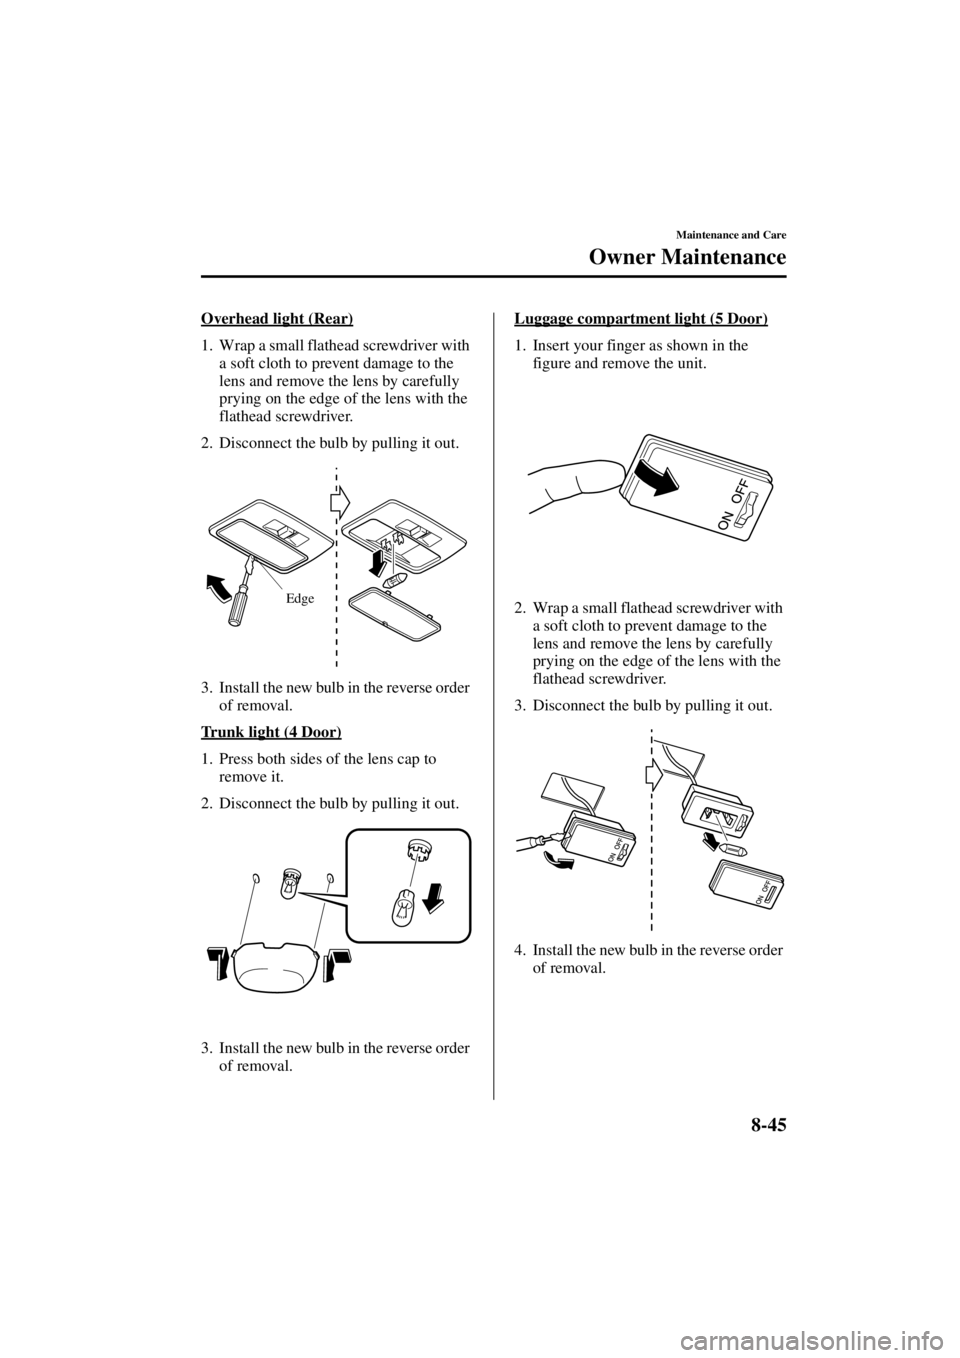 MAZDA MODEL 3 5-DOOR 2004  Owners Manual 8-45
Maintenance and Care
Owner Maintenance
Form No. 8S18-EA-03I
Overhead light (Rear)
1. Wrap a small flathead screwdriver with a soft cloth to prevent damage to the 
lens and remove the lens by care